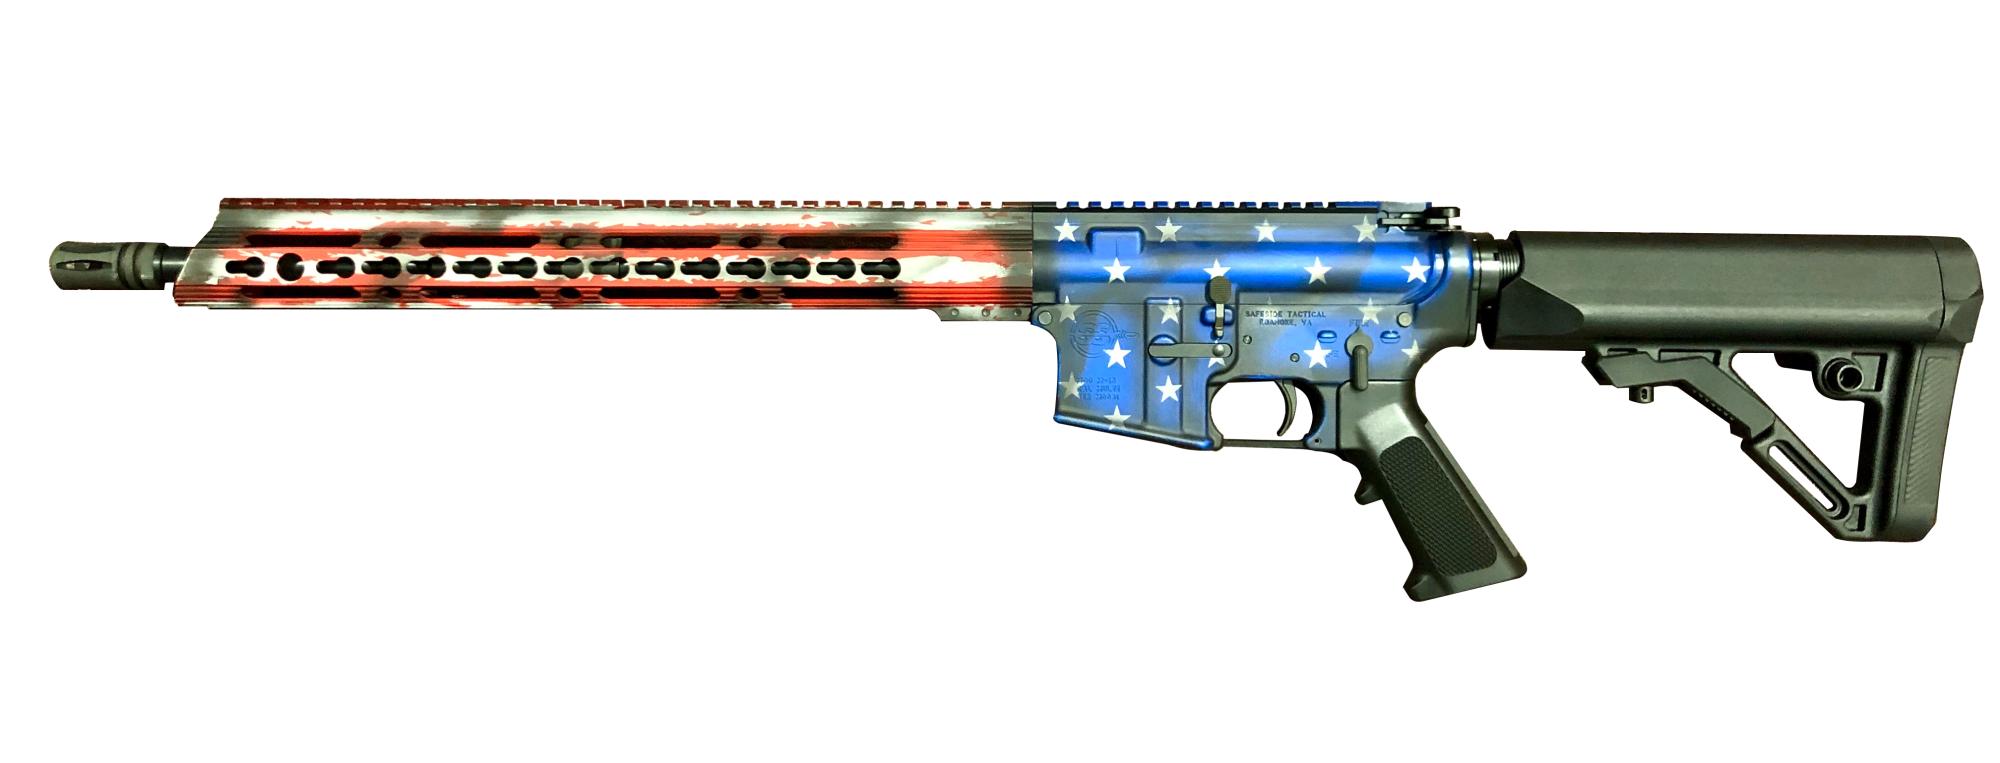 CUSTOM RED, WHITE, AND BLUE AR-15